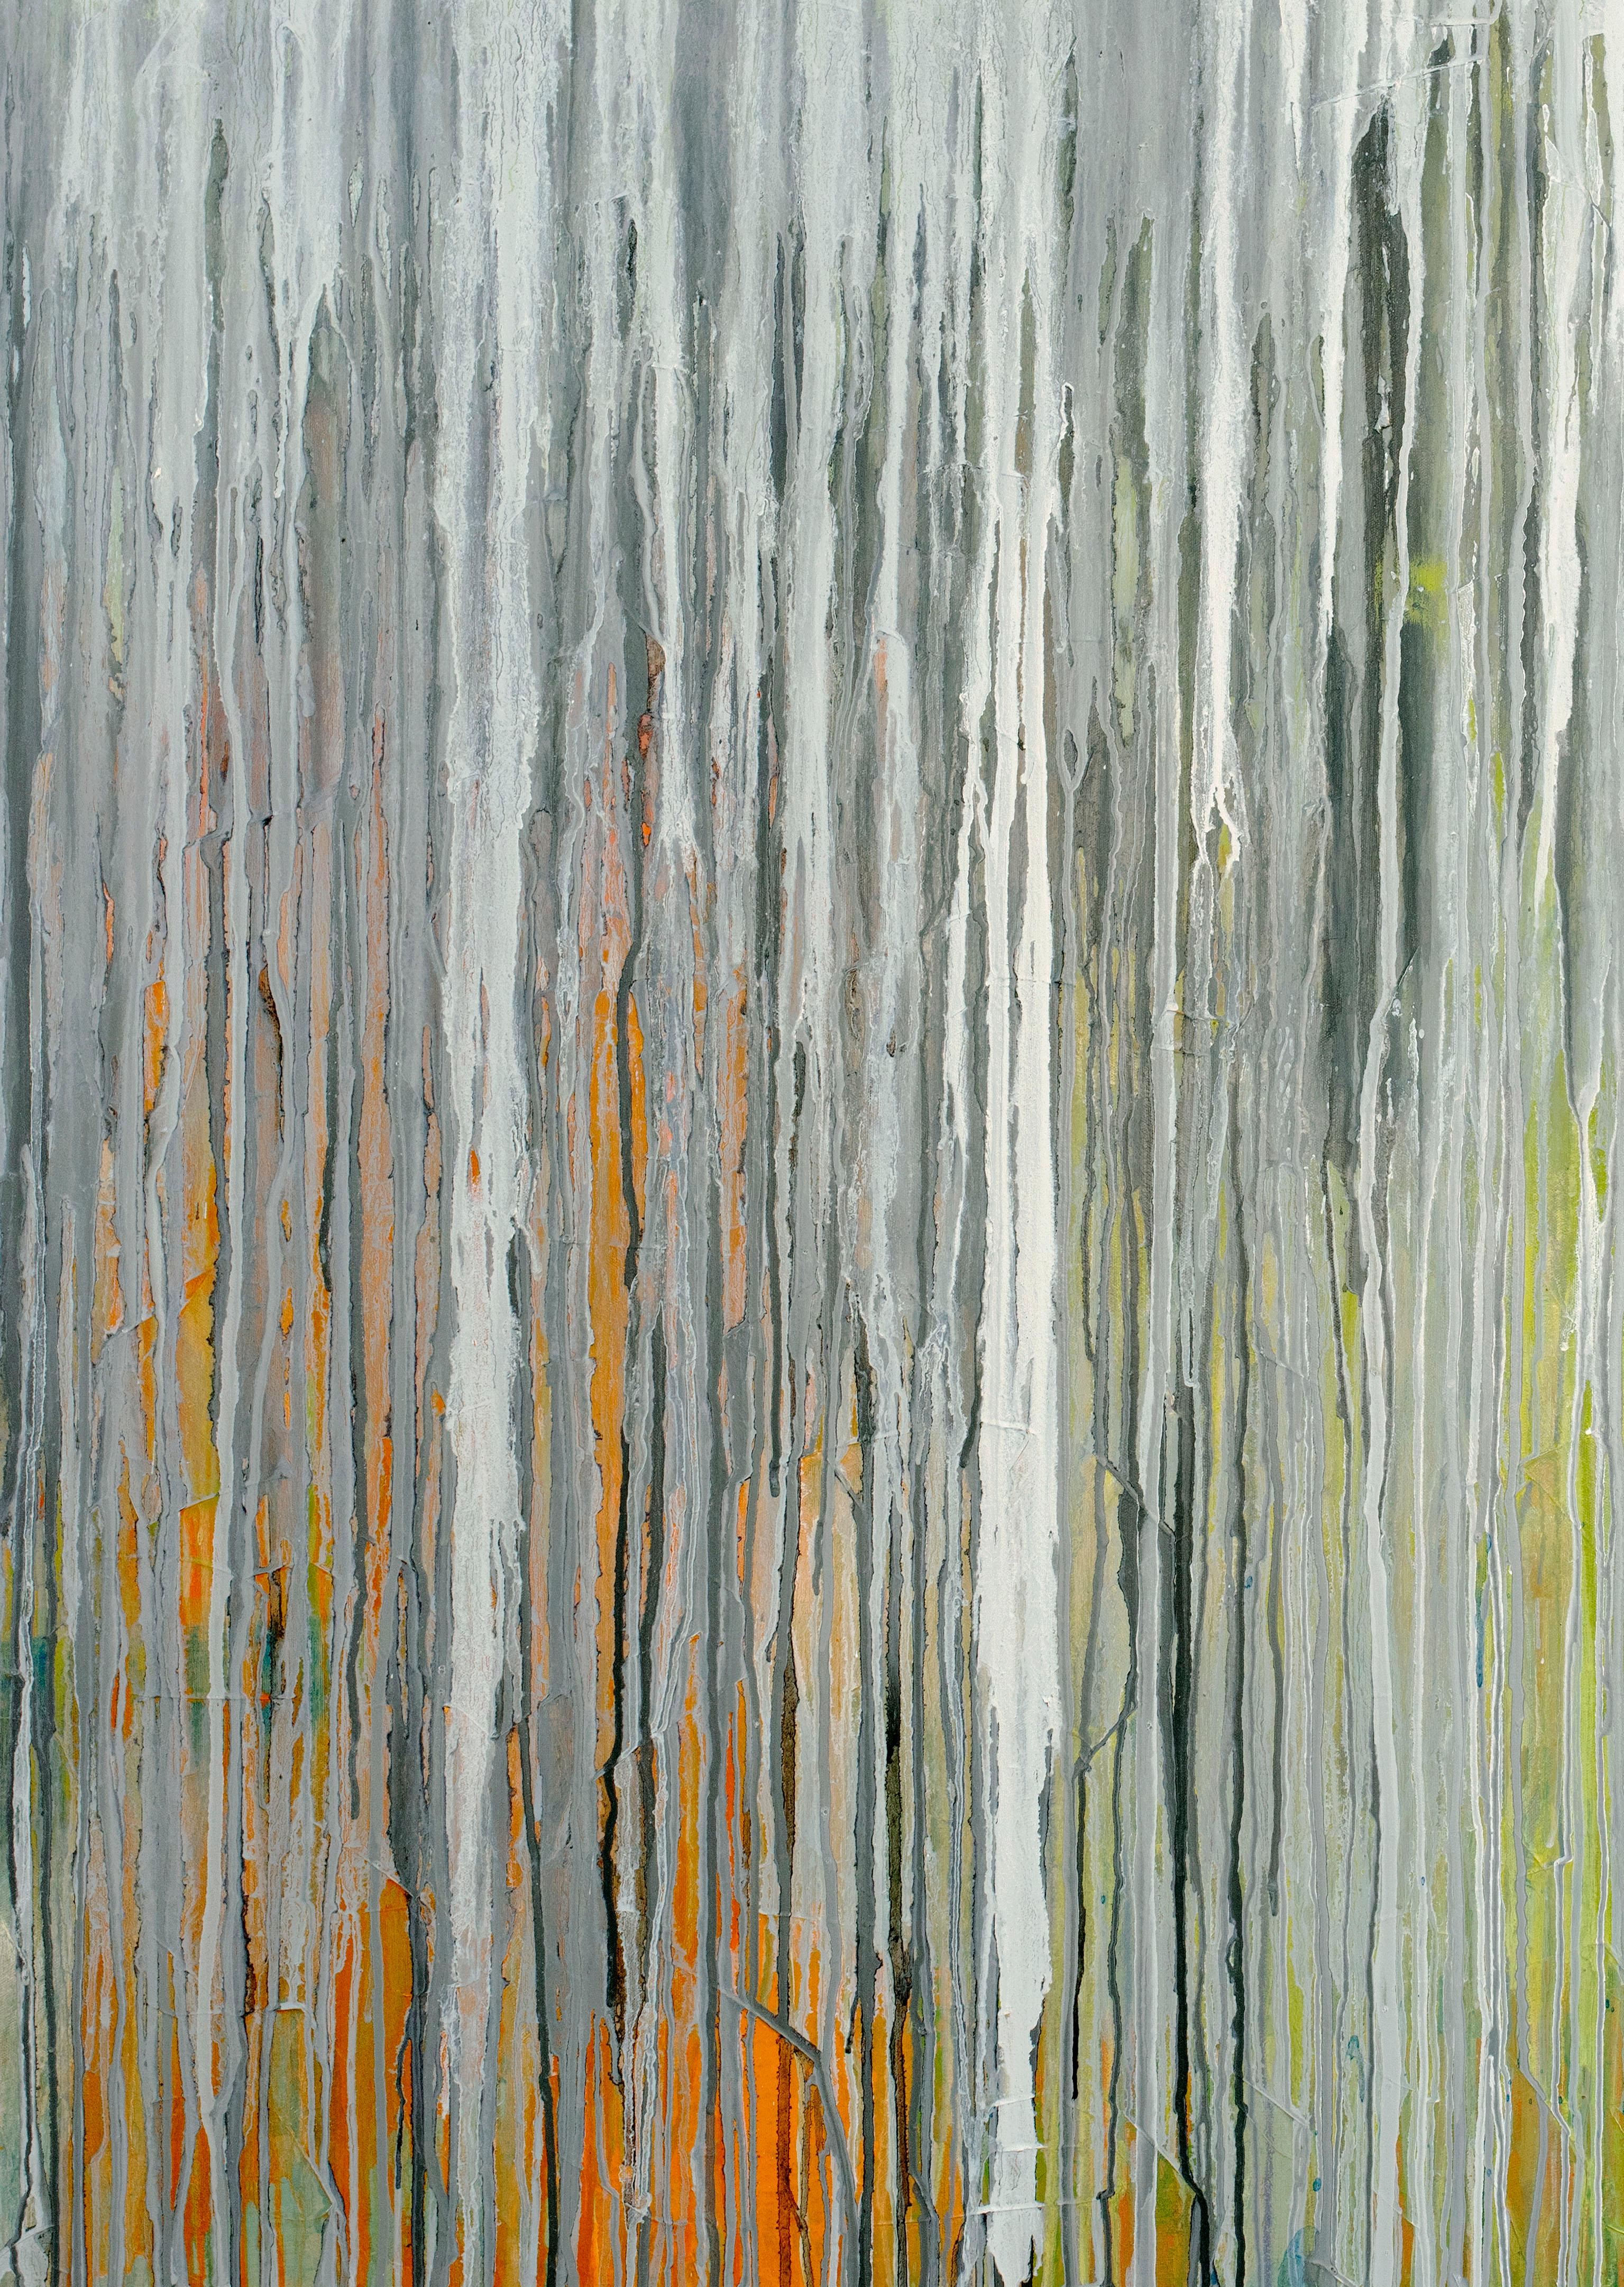 Abstract, contemporary, drip, navy, blue, silver, gold, orange, grey, yellow, green, layers, texture, Pat Steir, modern, abstraction, soothing, calm, spa, waterfall, river. Gallery wrapped canvas, 

Canvas sides are painted silver. Ready to hang. If